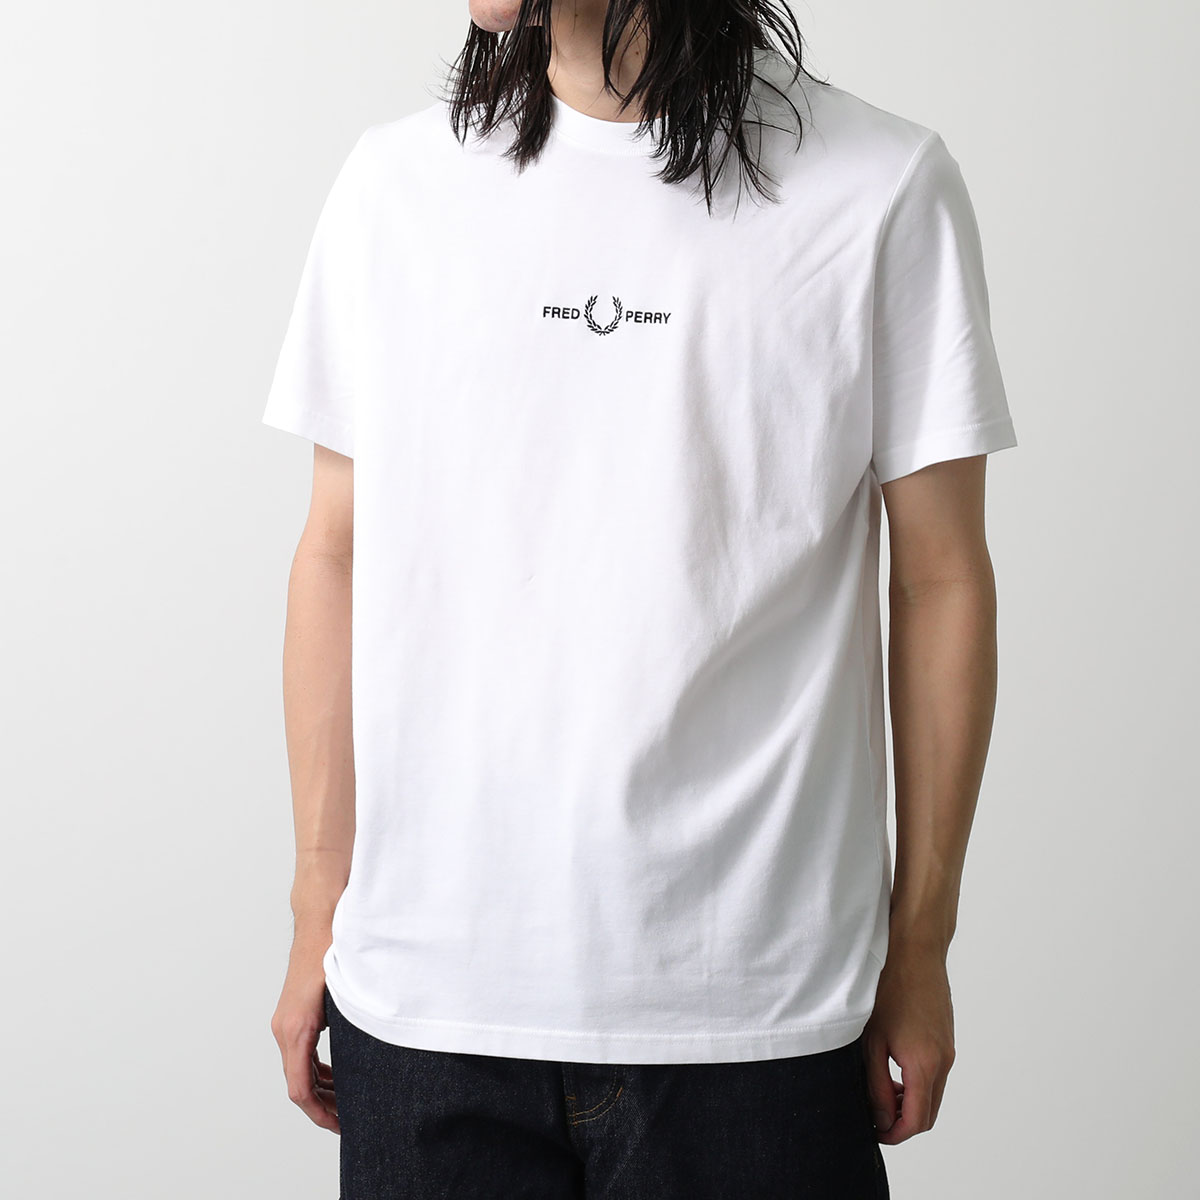 FRED PERRY Tシャツ EMBROIDERED T-SHIRT M4580 メンズ ロゴ 刺...